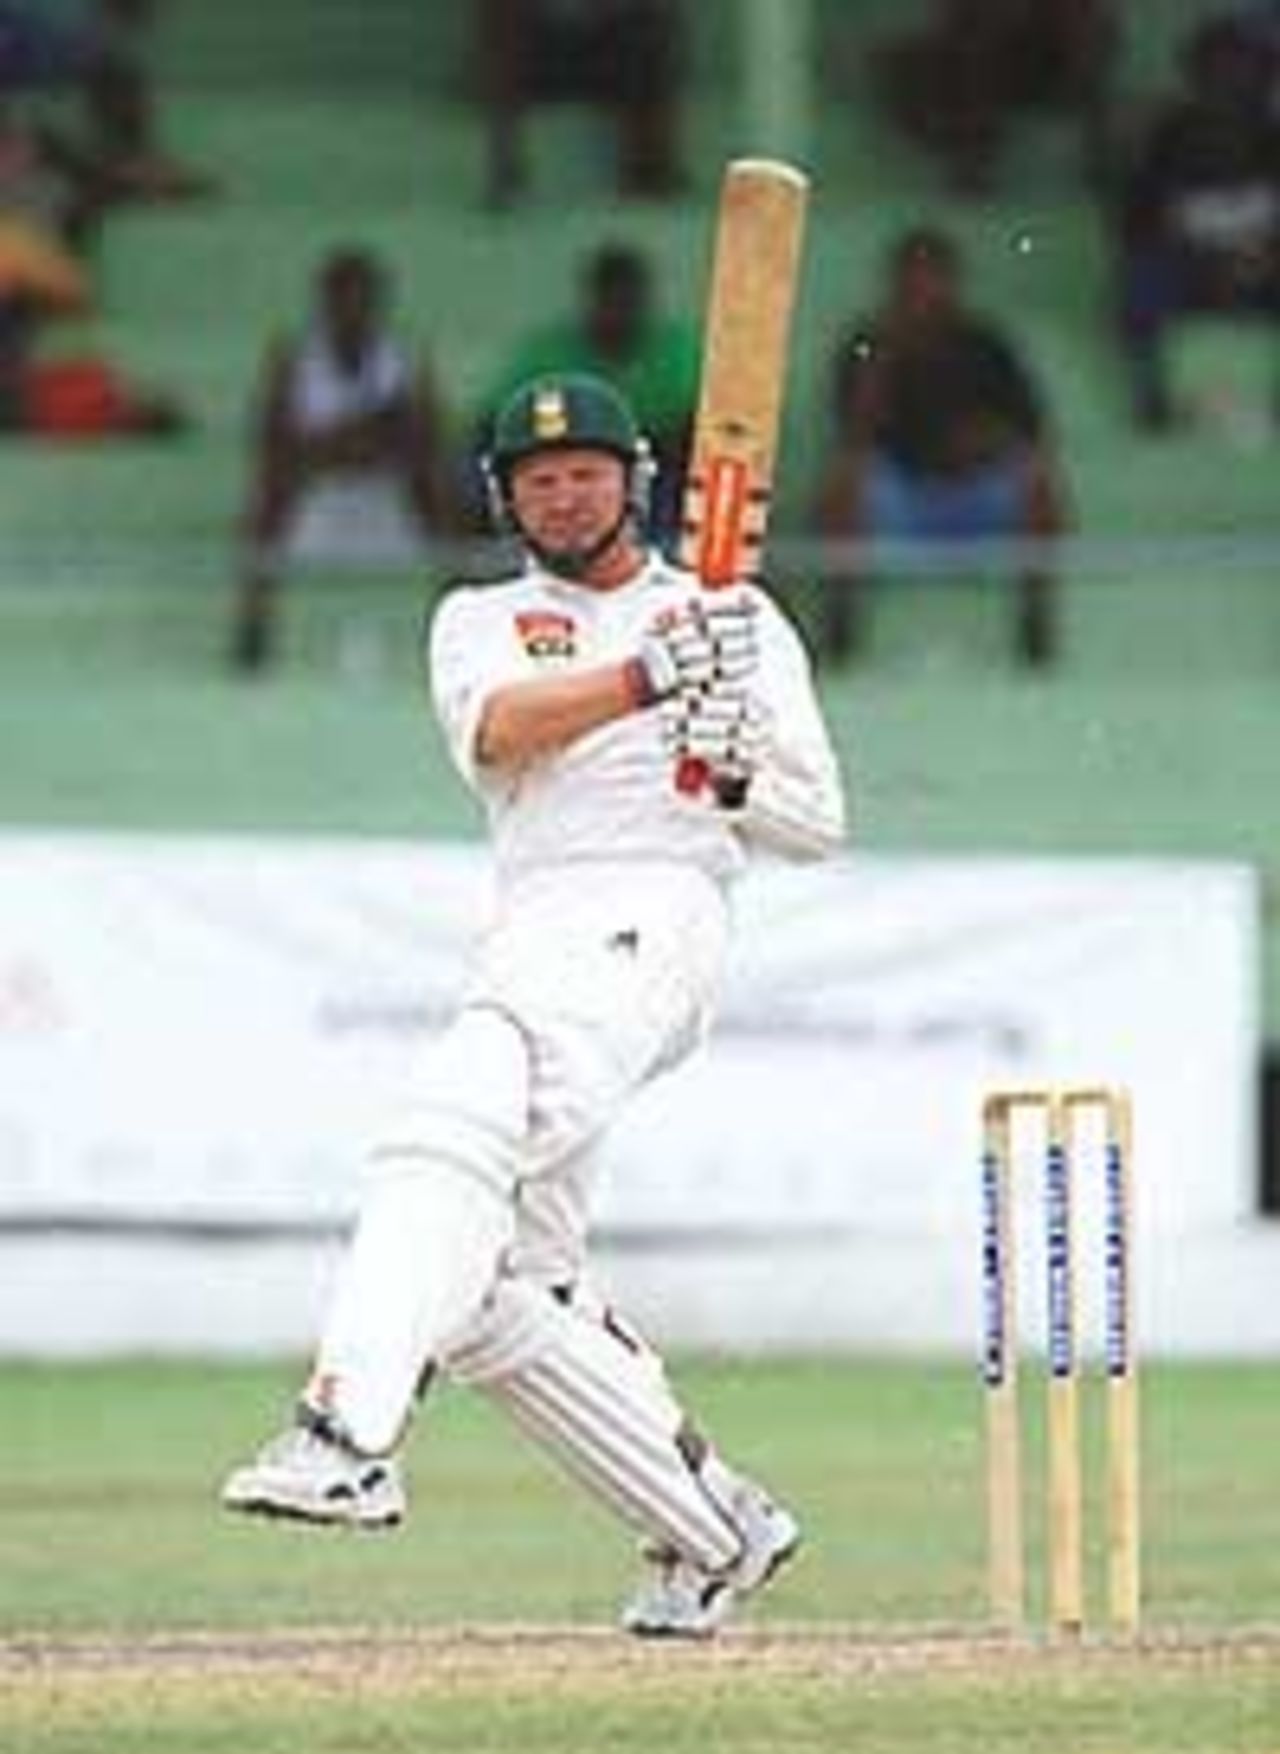 Taken on the 2001 South Africa tour of the West Indies